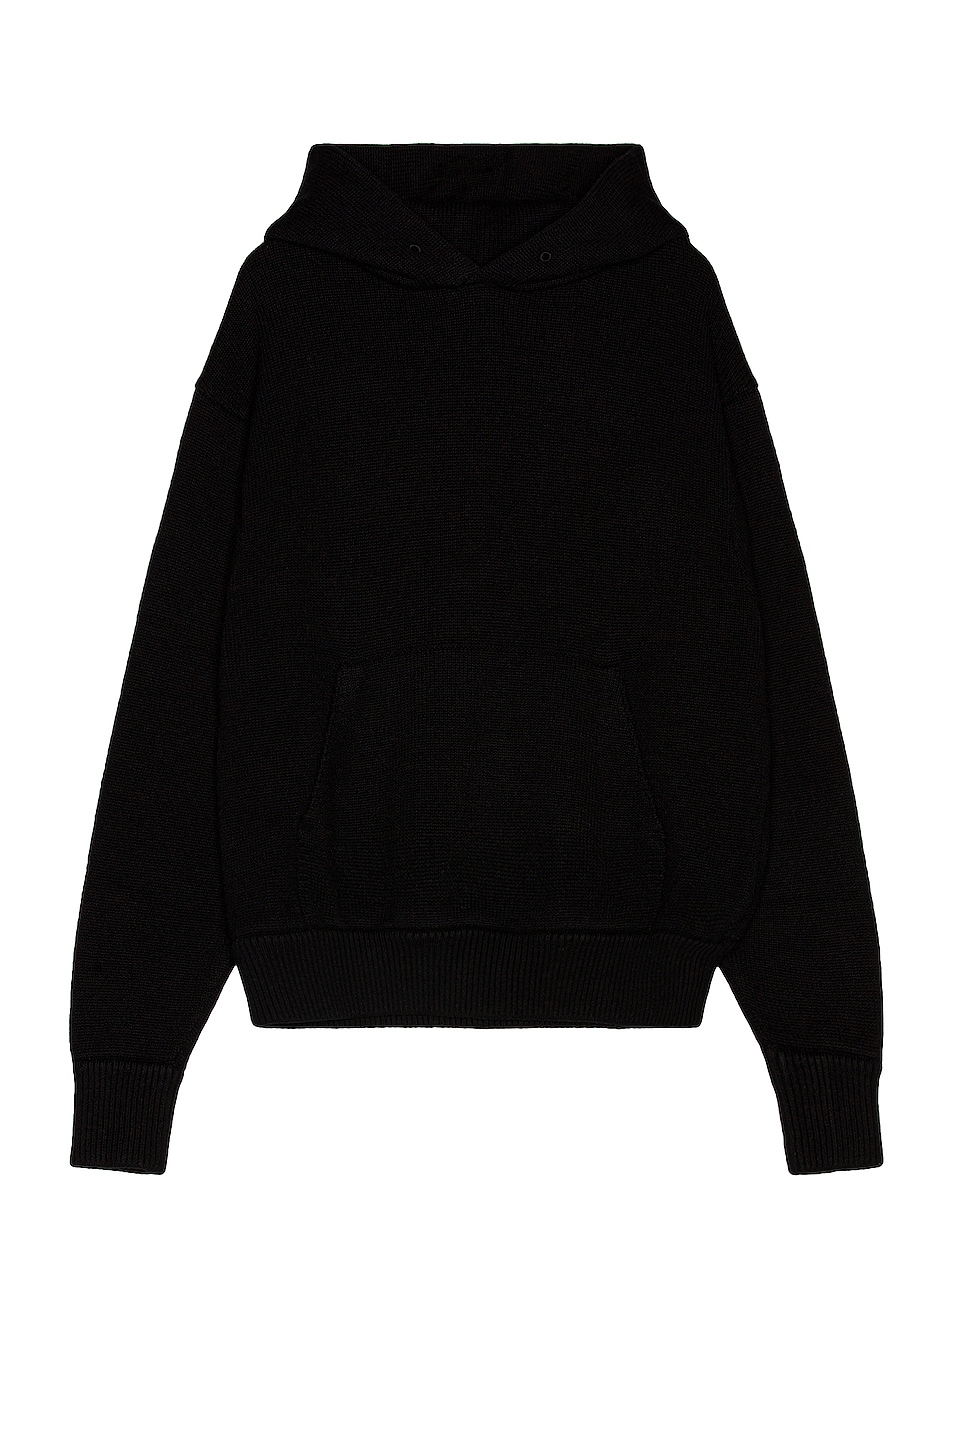 Image 1 of Fear of God Exclusively for Ermenegildo Zegna Cashmere Hoodie in Black